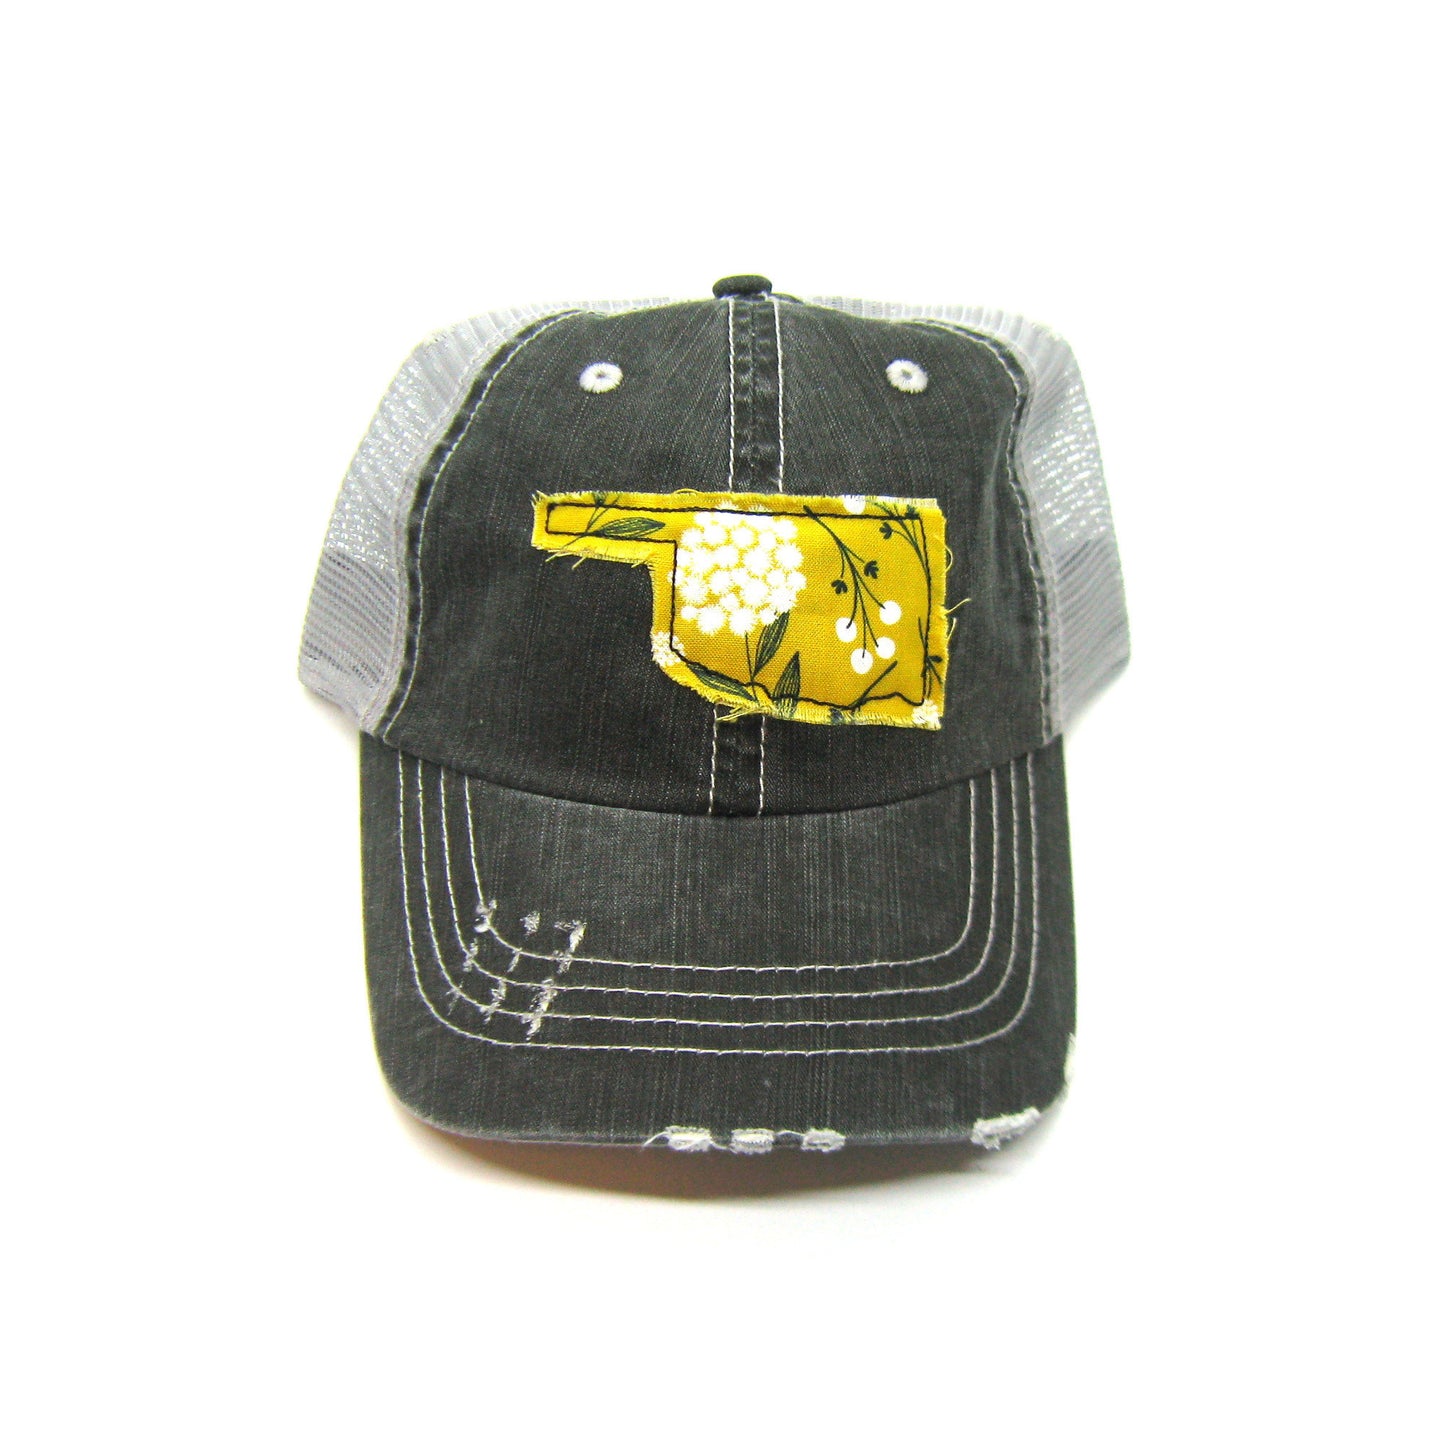 gray distressed trucker hat with gray floral fabric state of Oklahoma